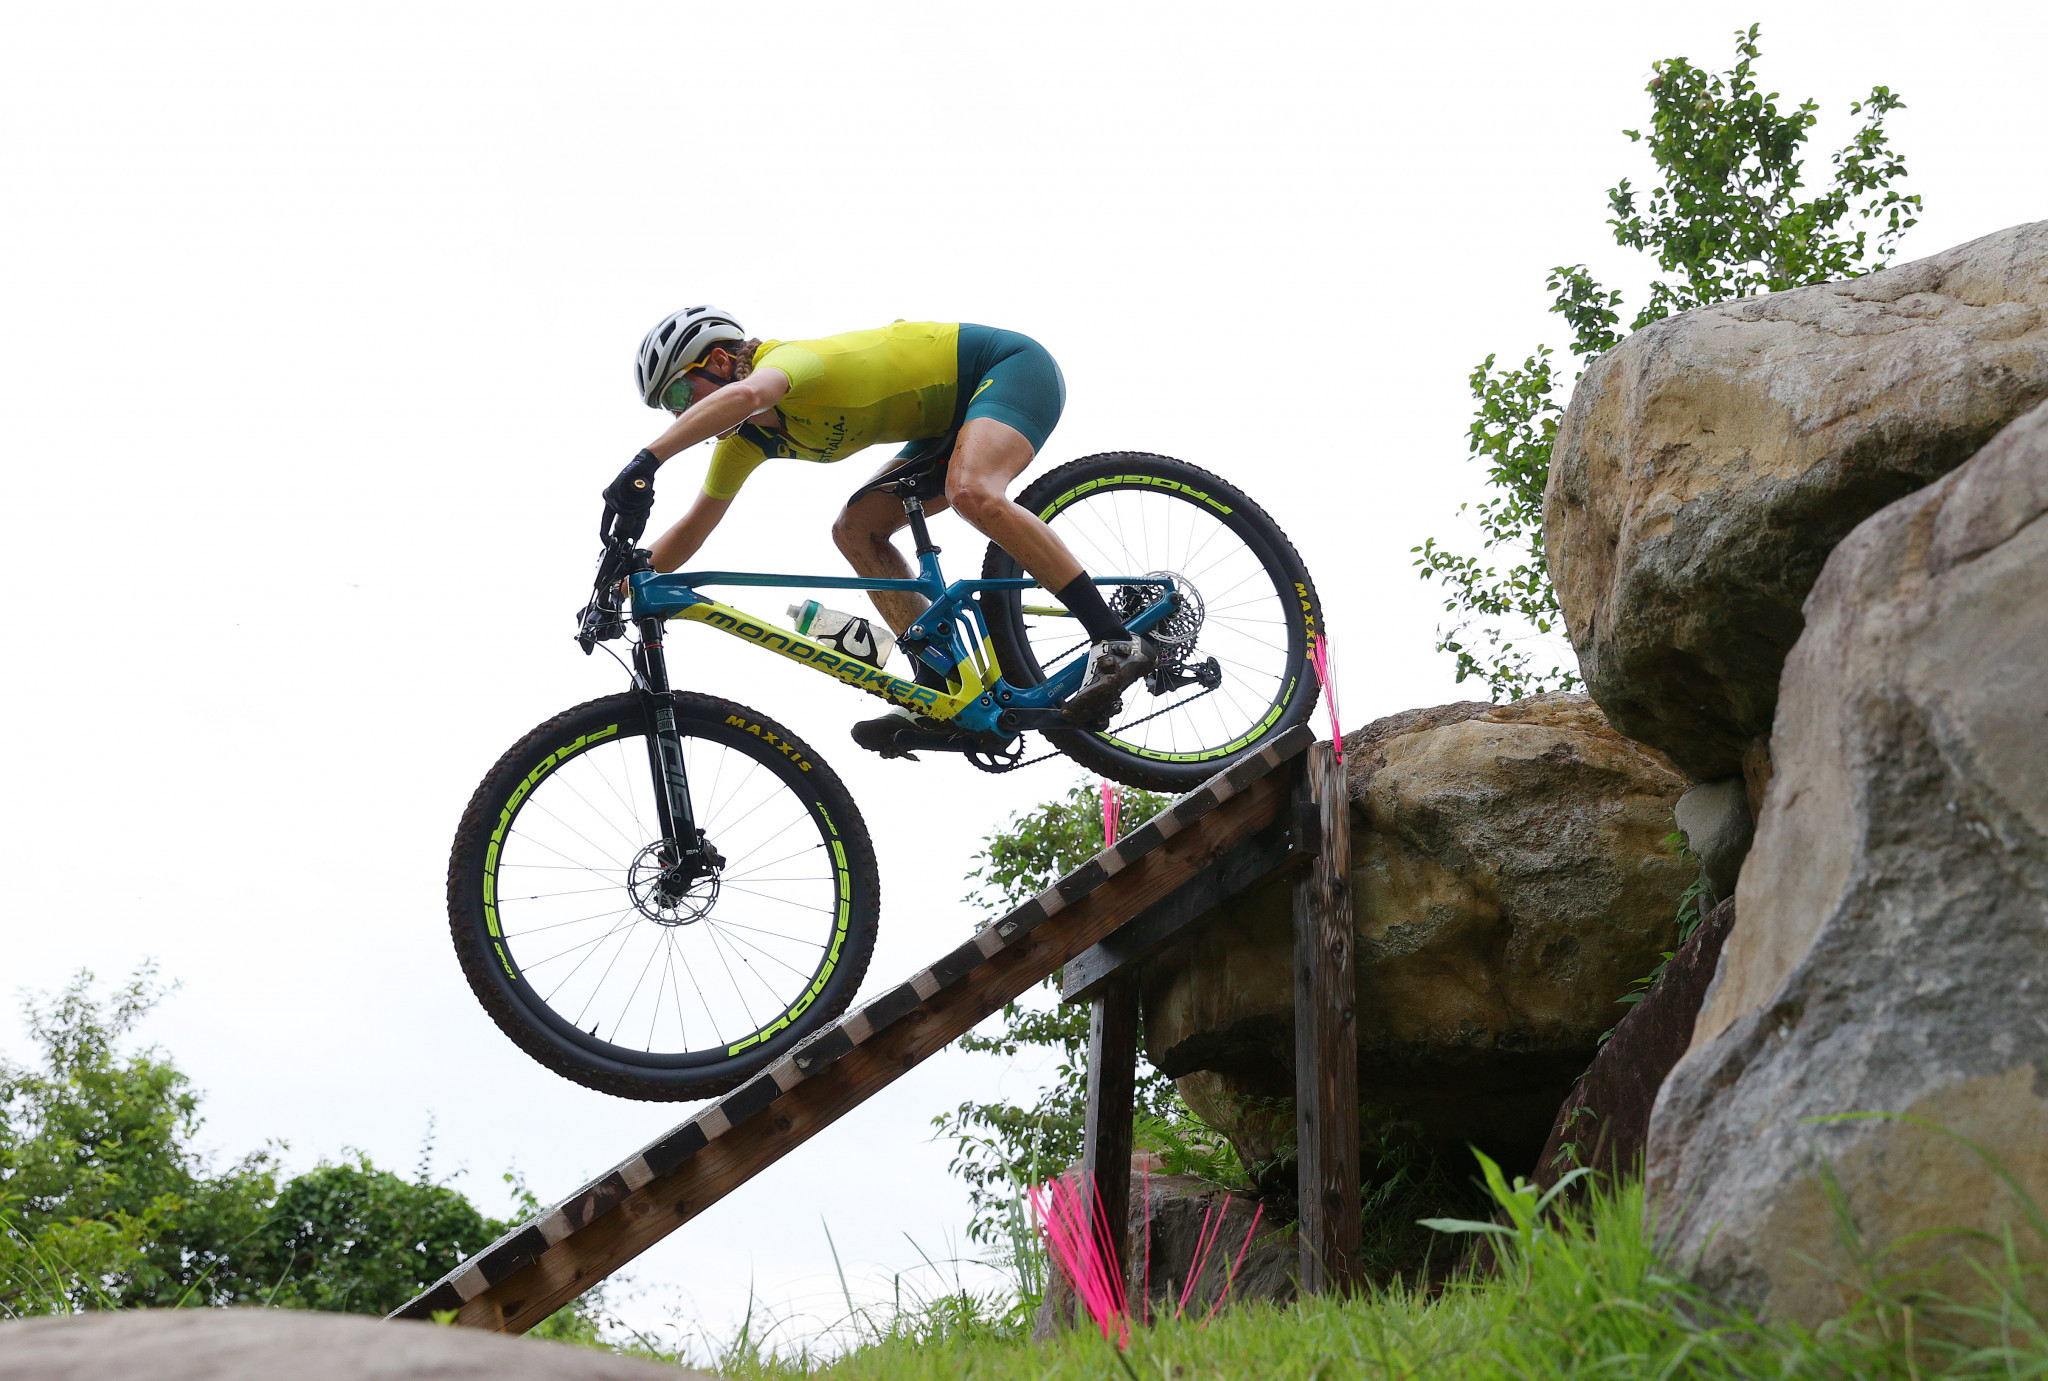 Triple-header sets up thrilling UCI Mountain Bike World Cup leg in Leogang